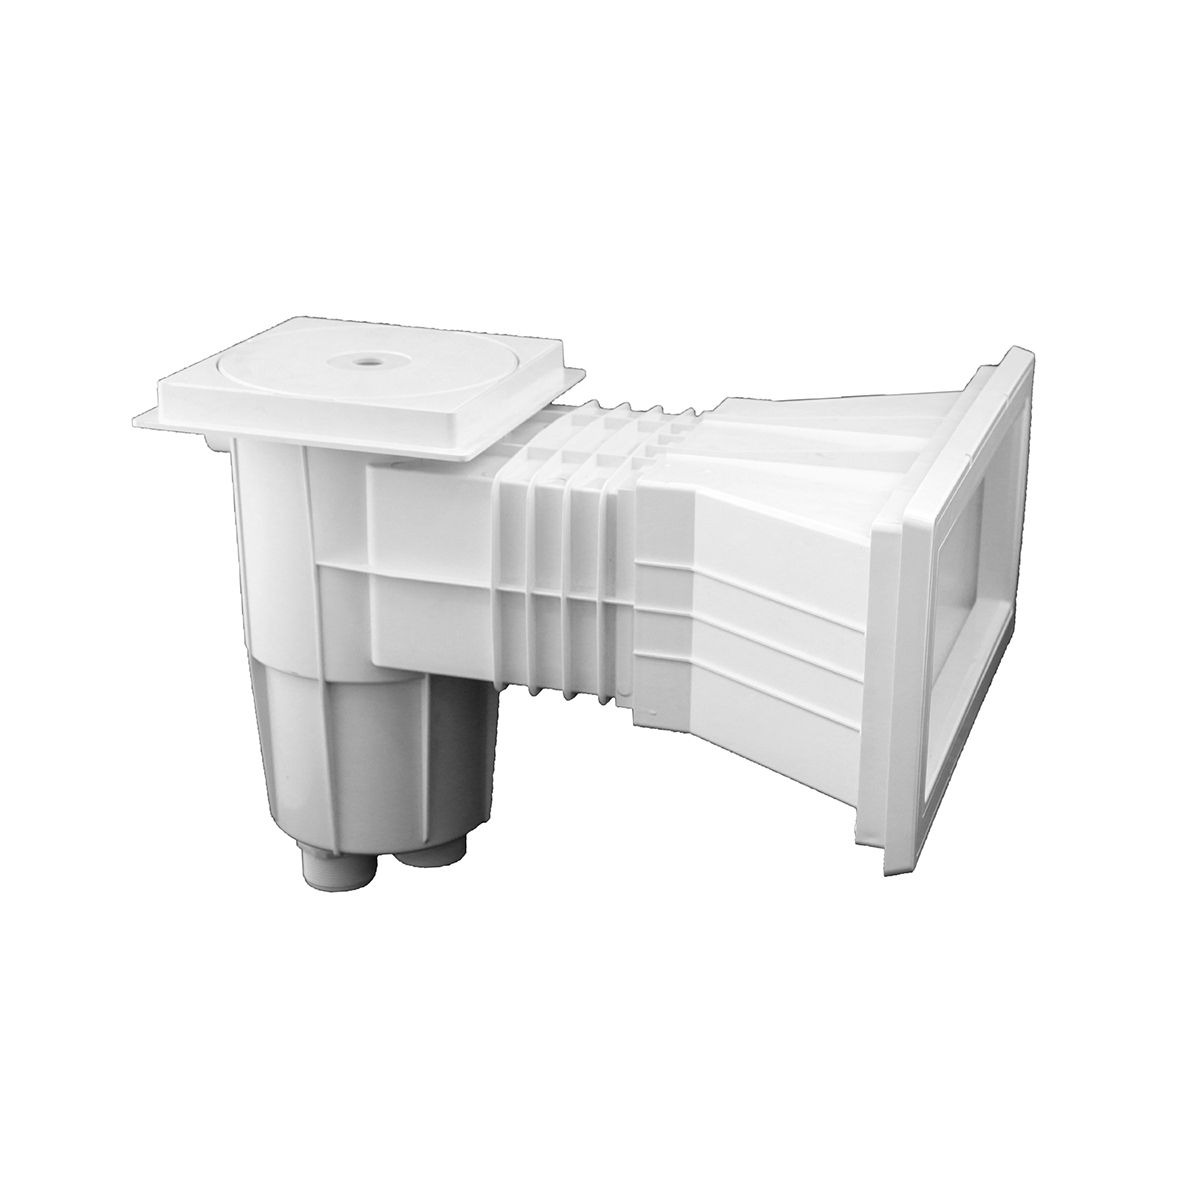 Smart wide mouth skimmer for polyester and liner pools, ABS, white Smart wide mouth skimmer for polyester and liner pools, ABS, white